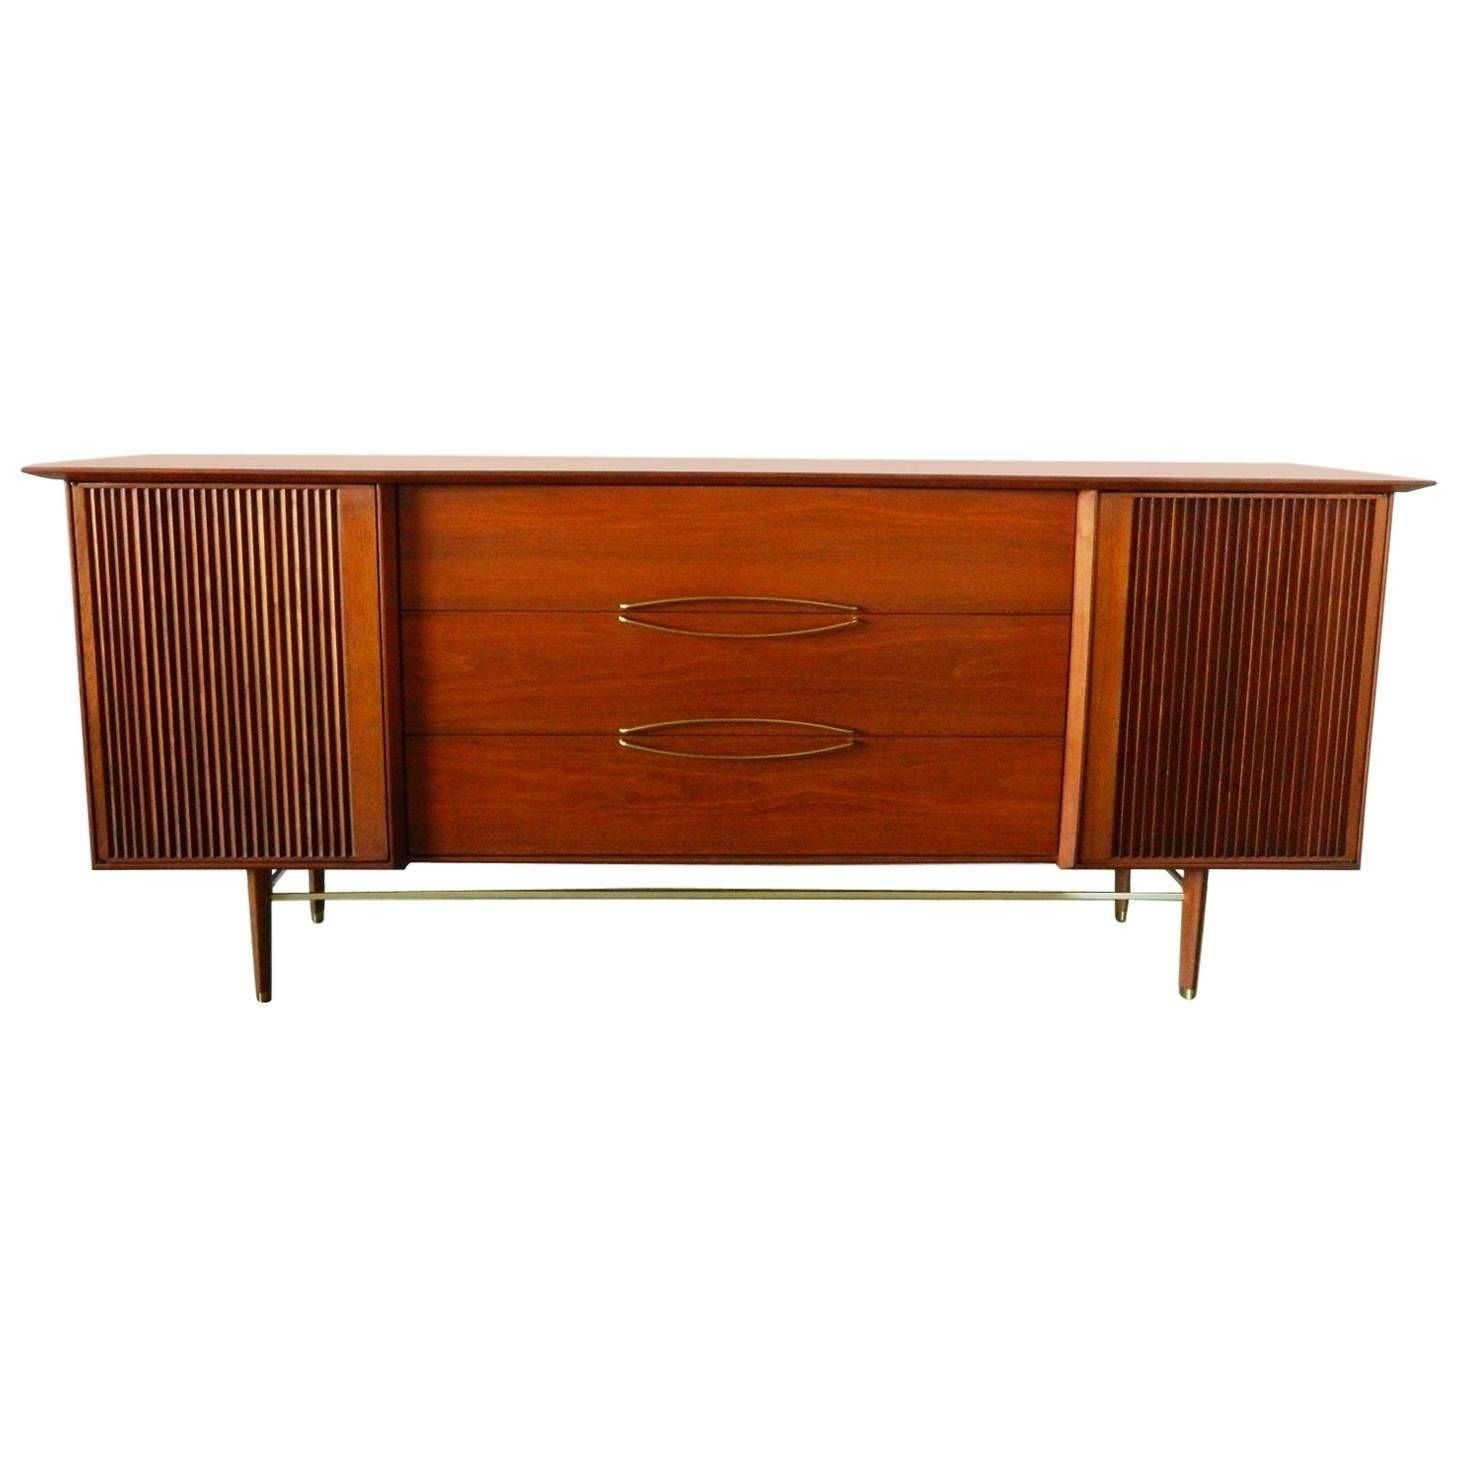 Exceptional Sideboard Wood And Glass Tags : Wood Sideboard Retro Regarding Thomasville Sideboards (View 11 of 15)